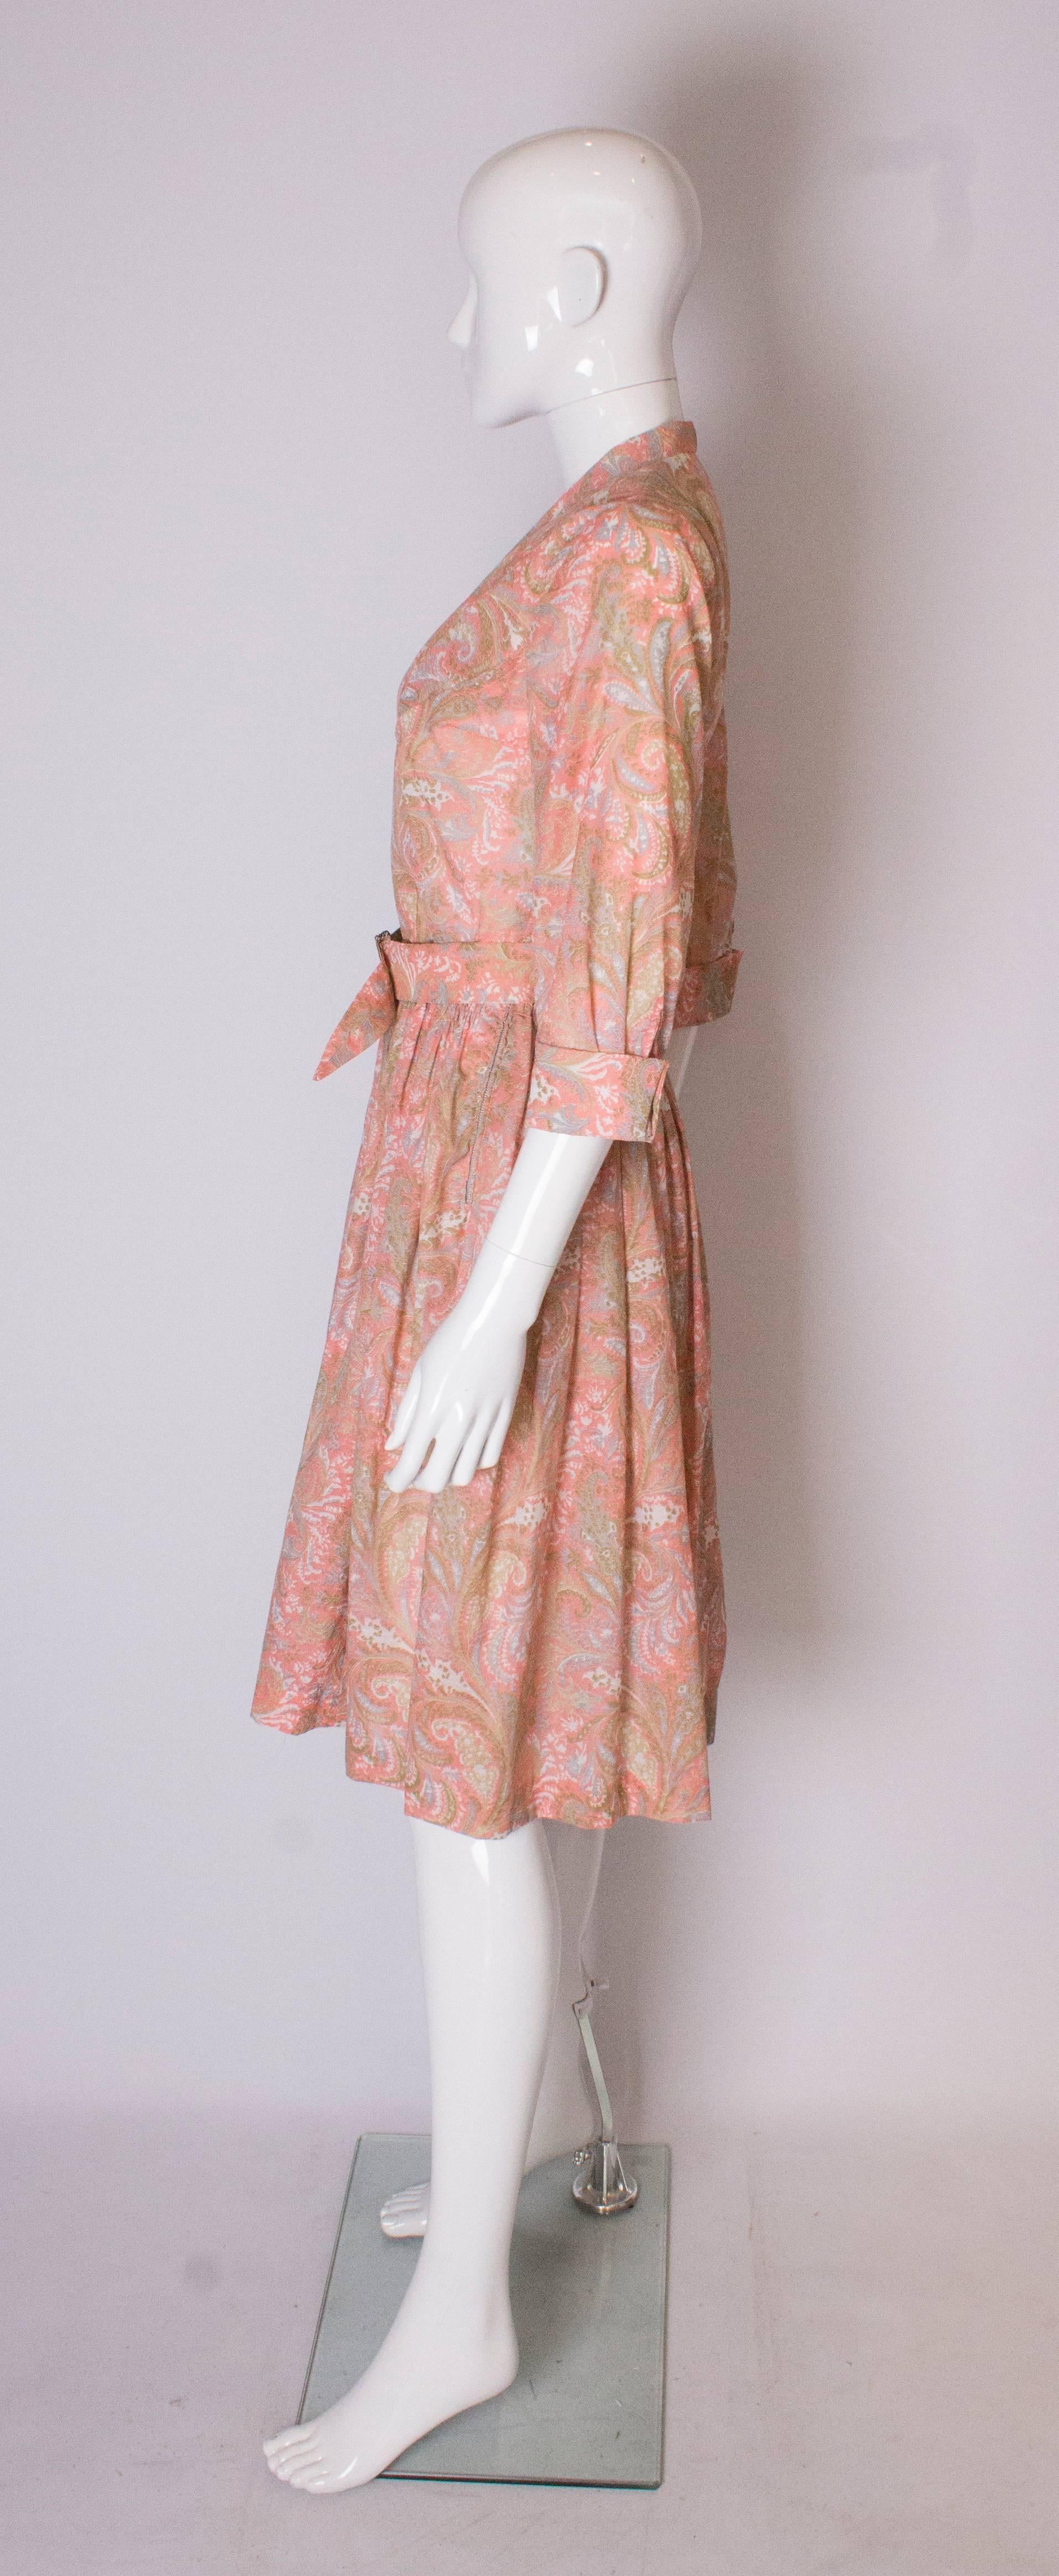 Women's A vintage 1950s Pretty printed cotton day Dress with matching Decorative Belt